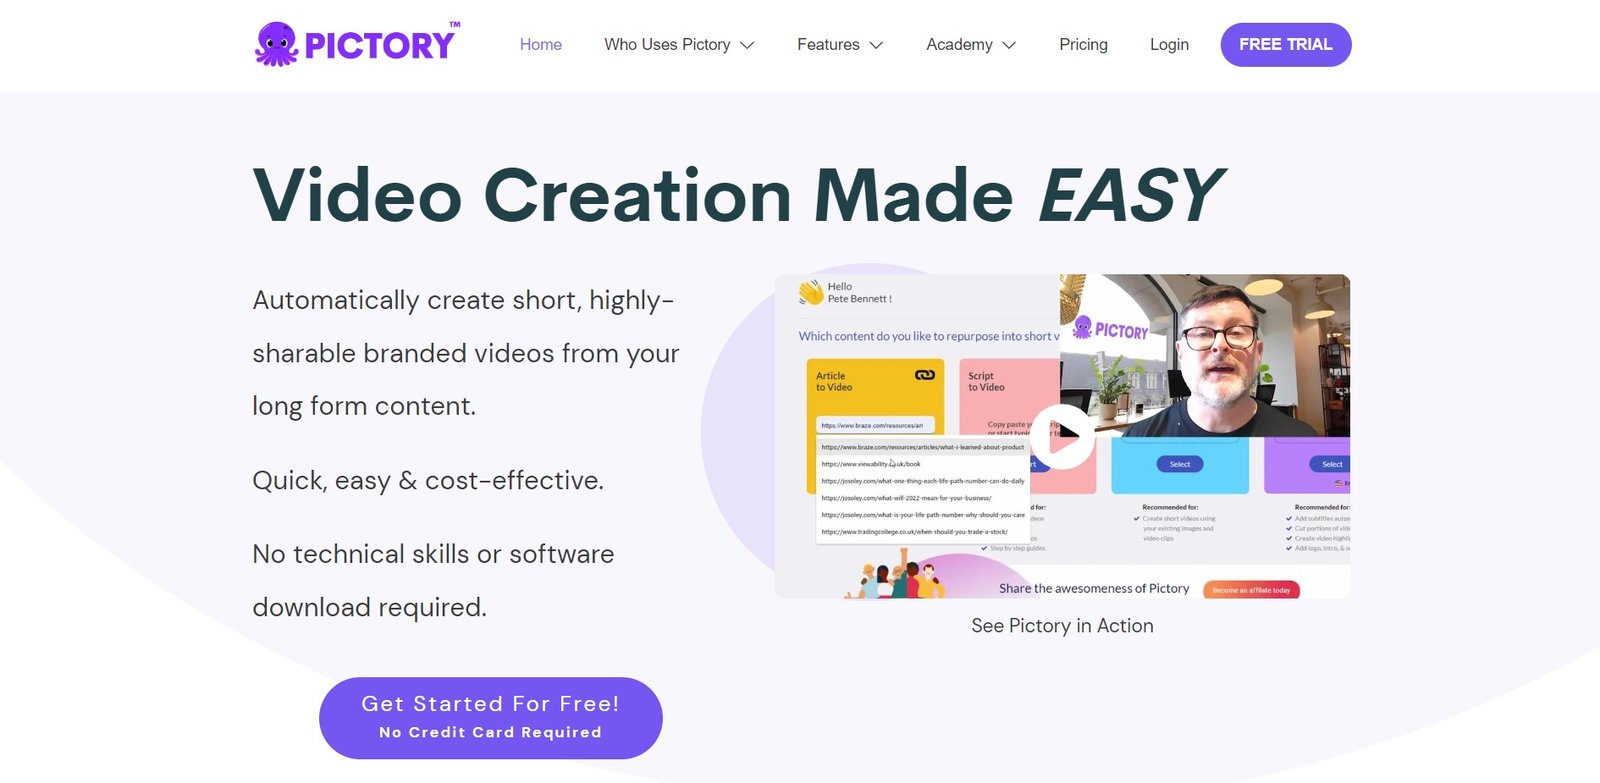 Pictory is an AI video tool that converts long-form content into shareable branded video snippets